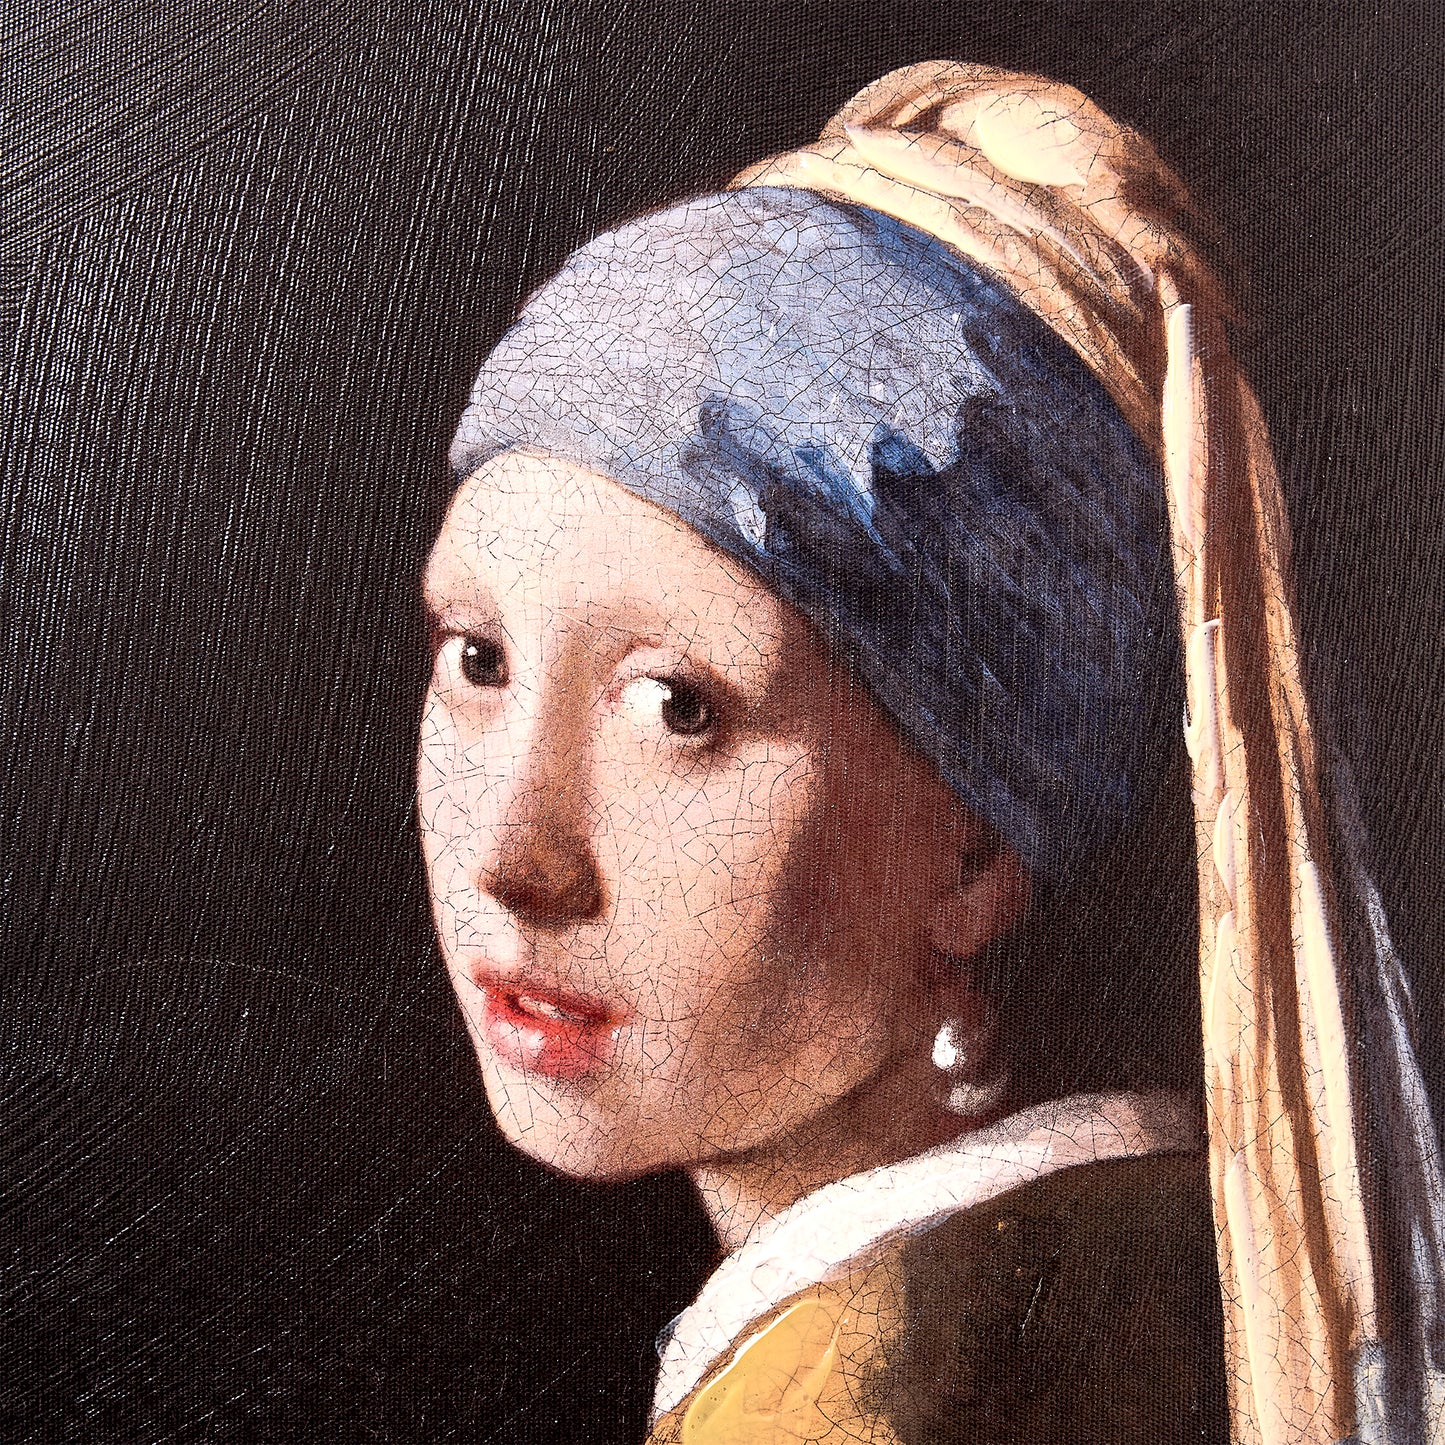 Ornate Framed Girl with a Pearl Earring Canvas Print by Johannes Vermeer 19.25" x 23.25"